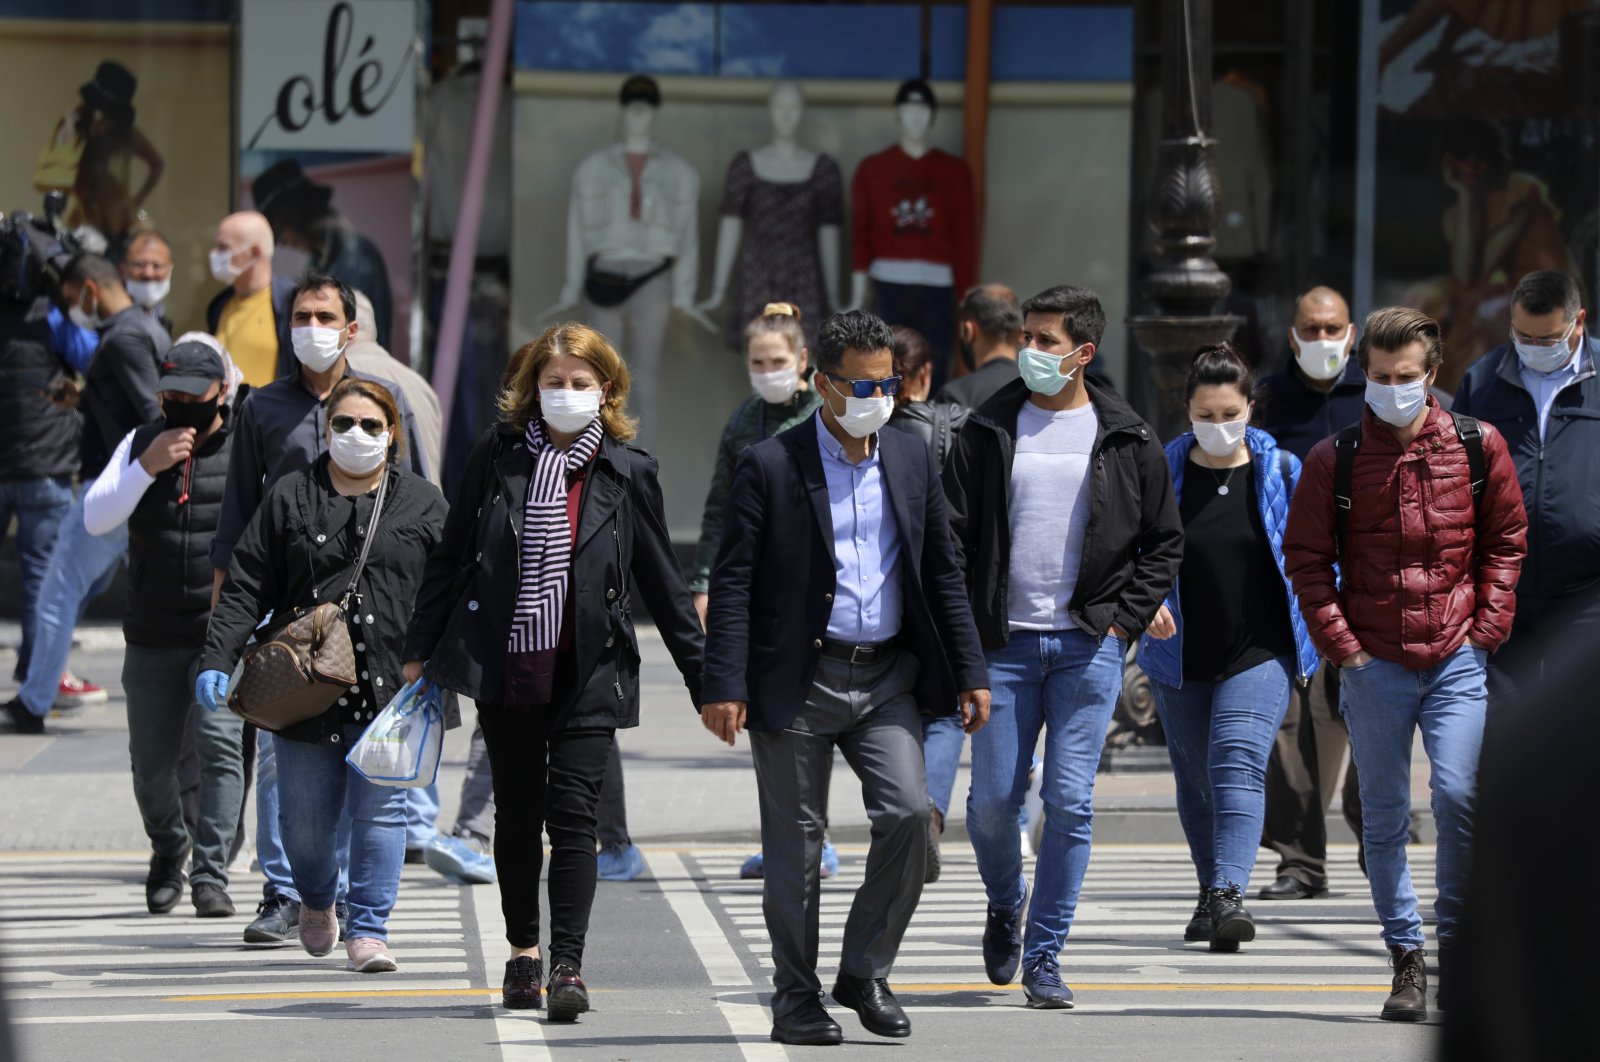 People wearing face masks for protection against the coronavirus walk in a busy street, in the capital Ankara, Turkey, May 5, 2020. (AP Photo)